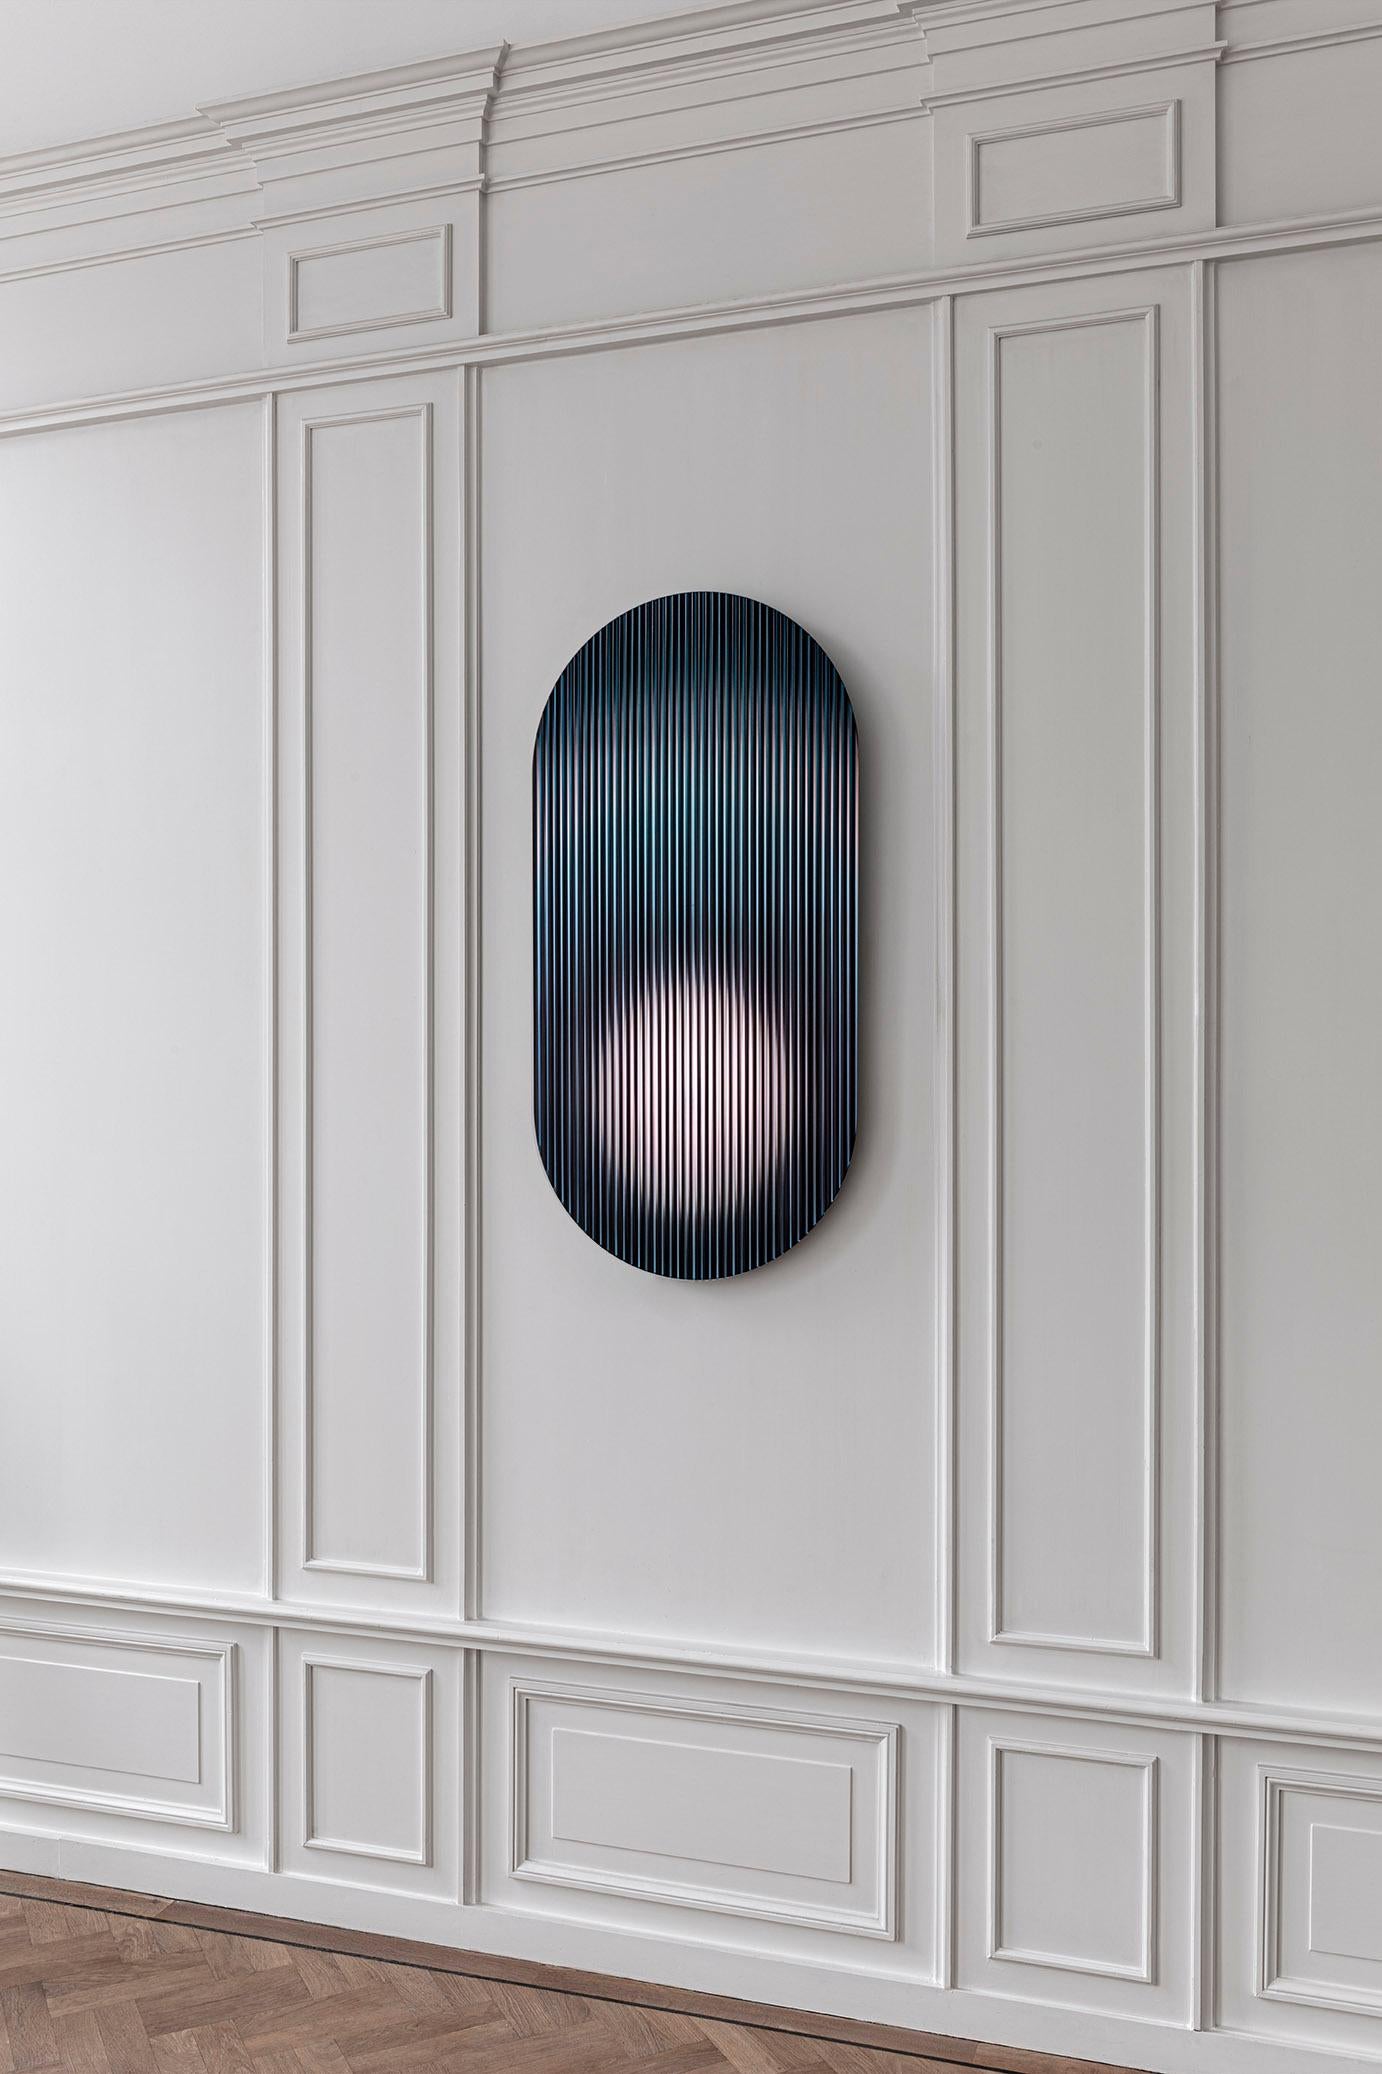 The reflective, coloured, rippled glass panel – designed to add a palette of colour to spaces – reflects light in spaces and adds movement and color whilst creating abstracted reflections. The piece disperses light through its rippled surface